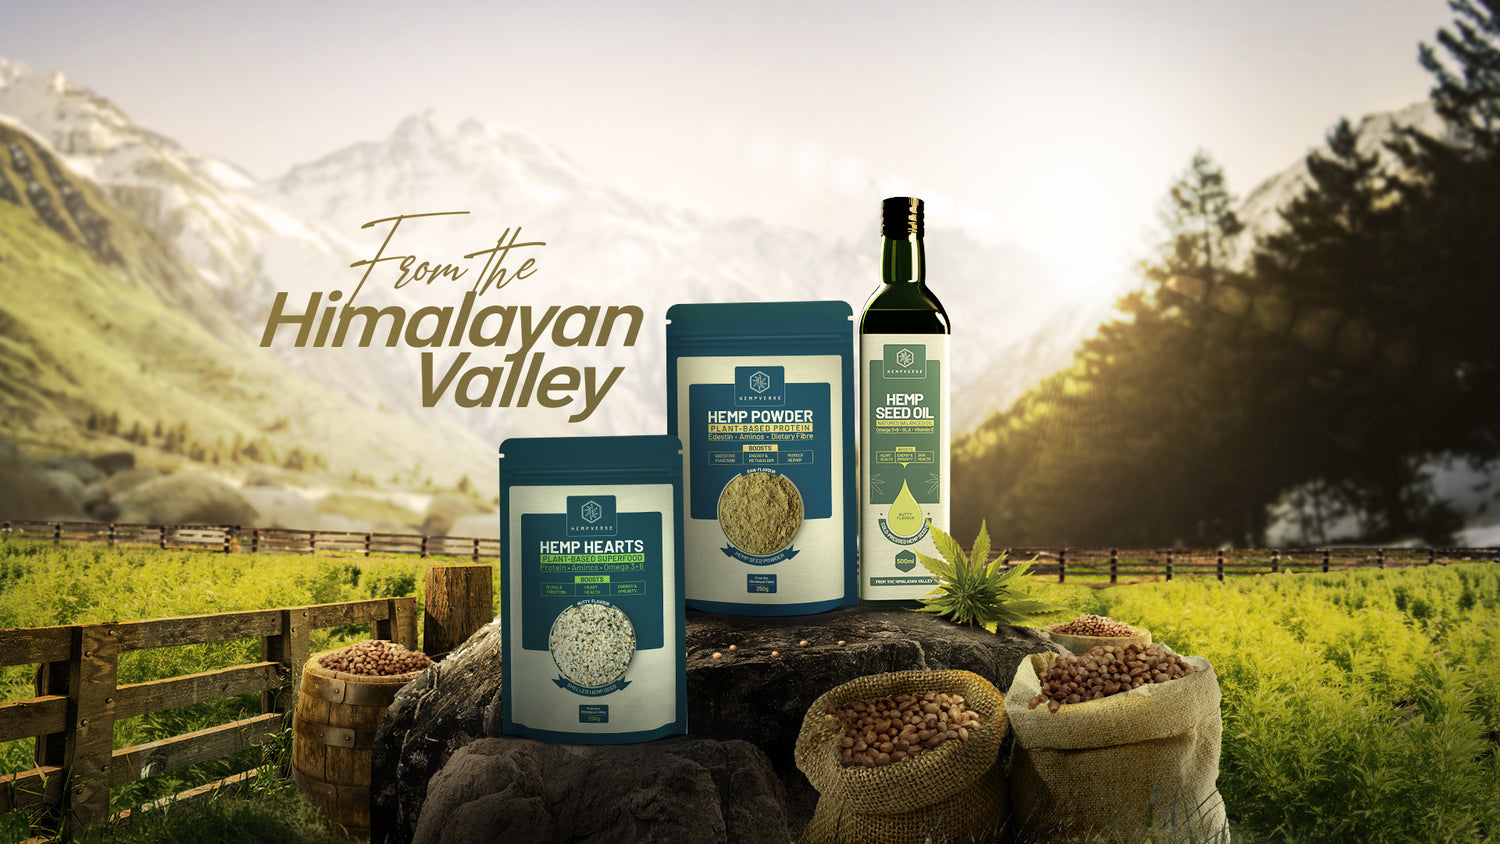 Hemp hearts, hemp powder, and hemp oil are kept in the Himalayan valley's background.